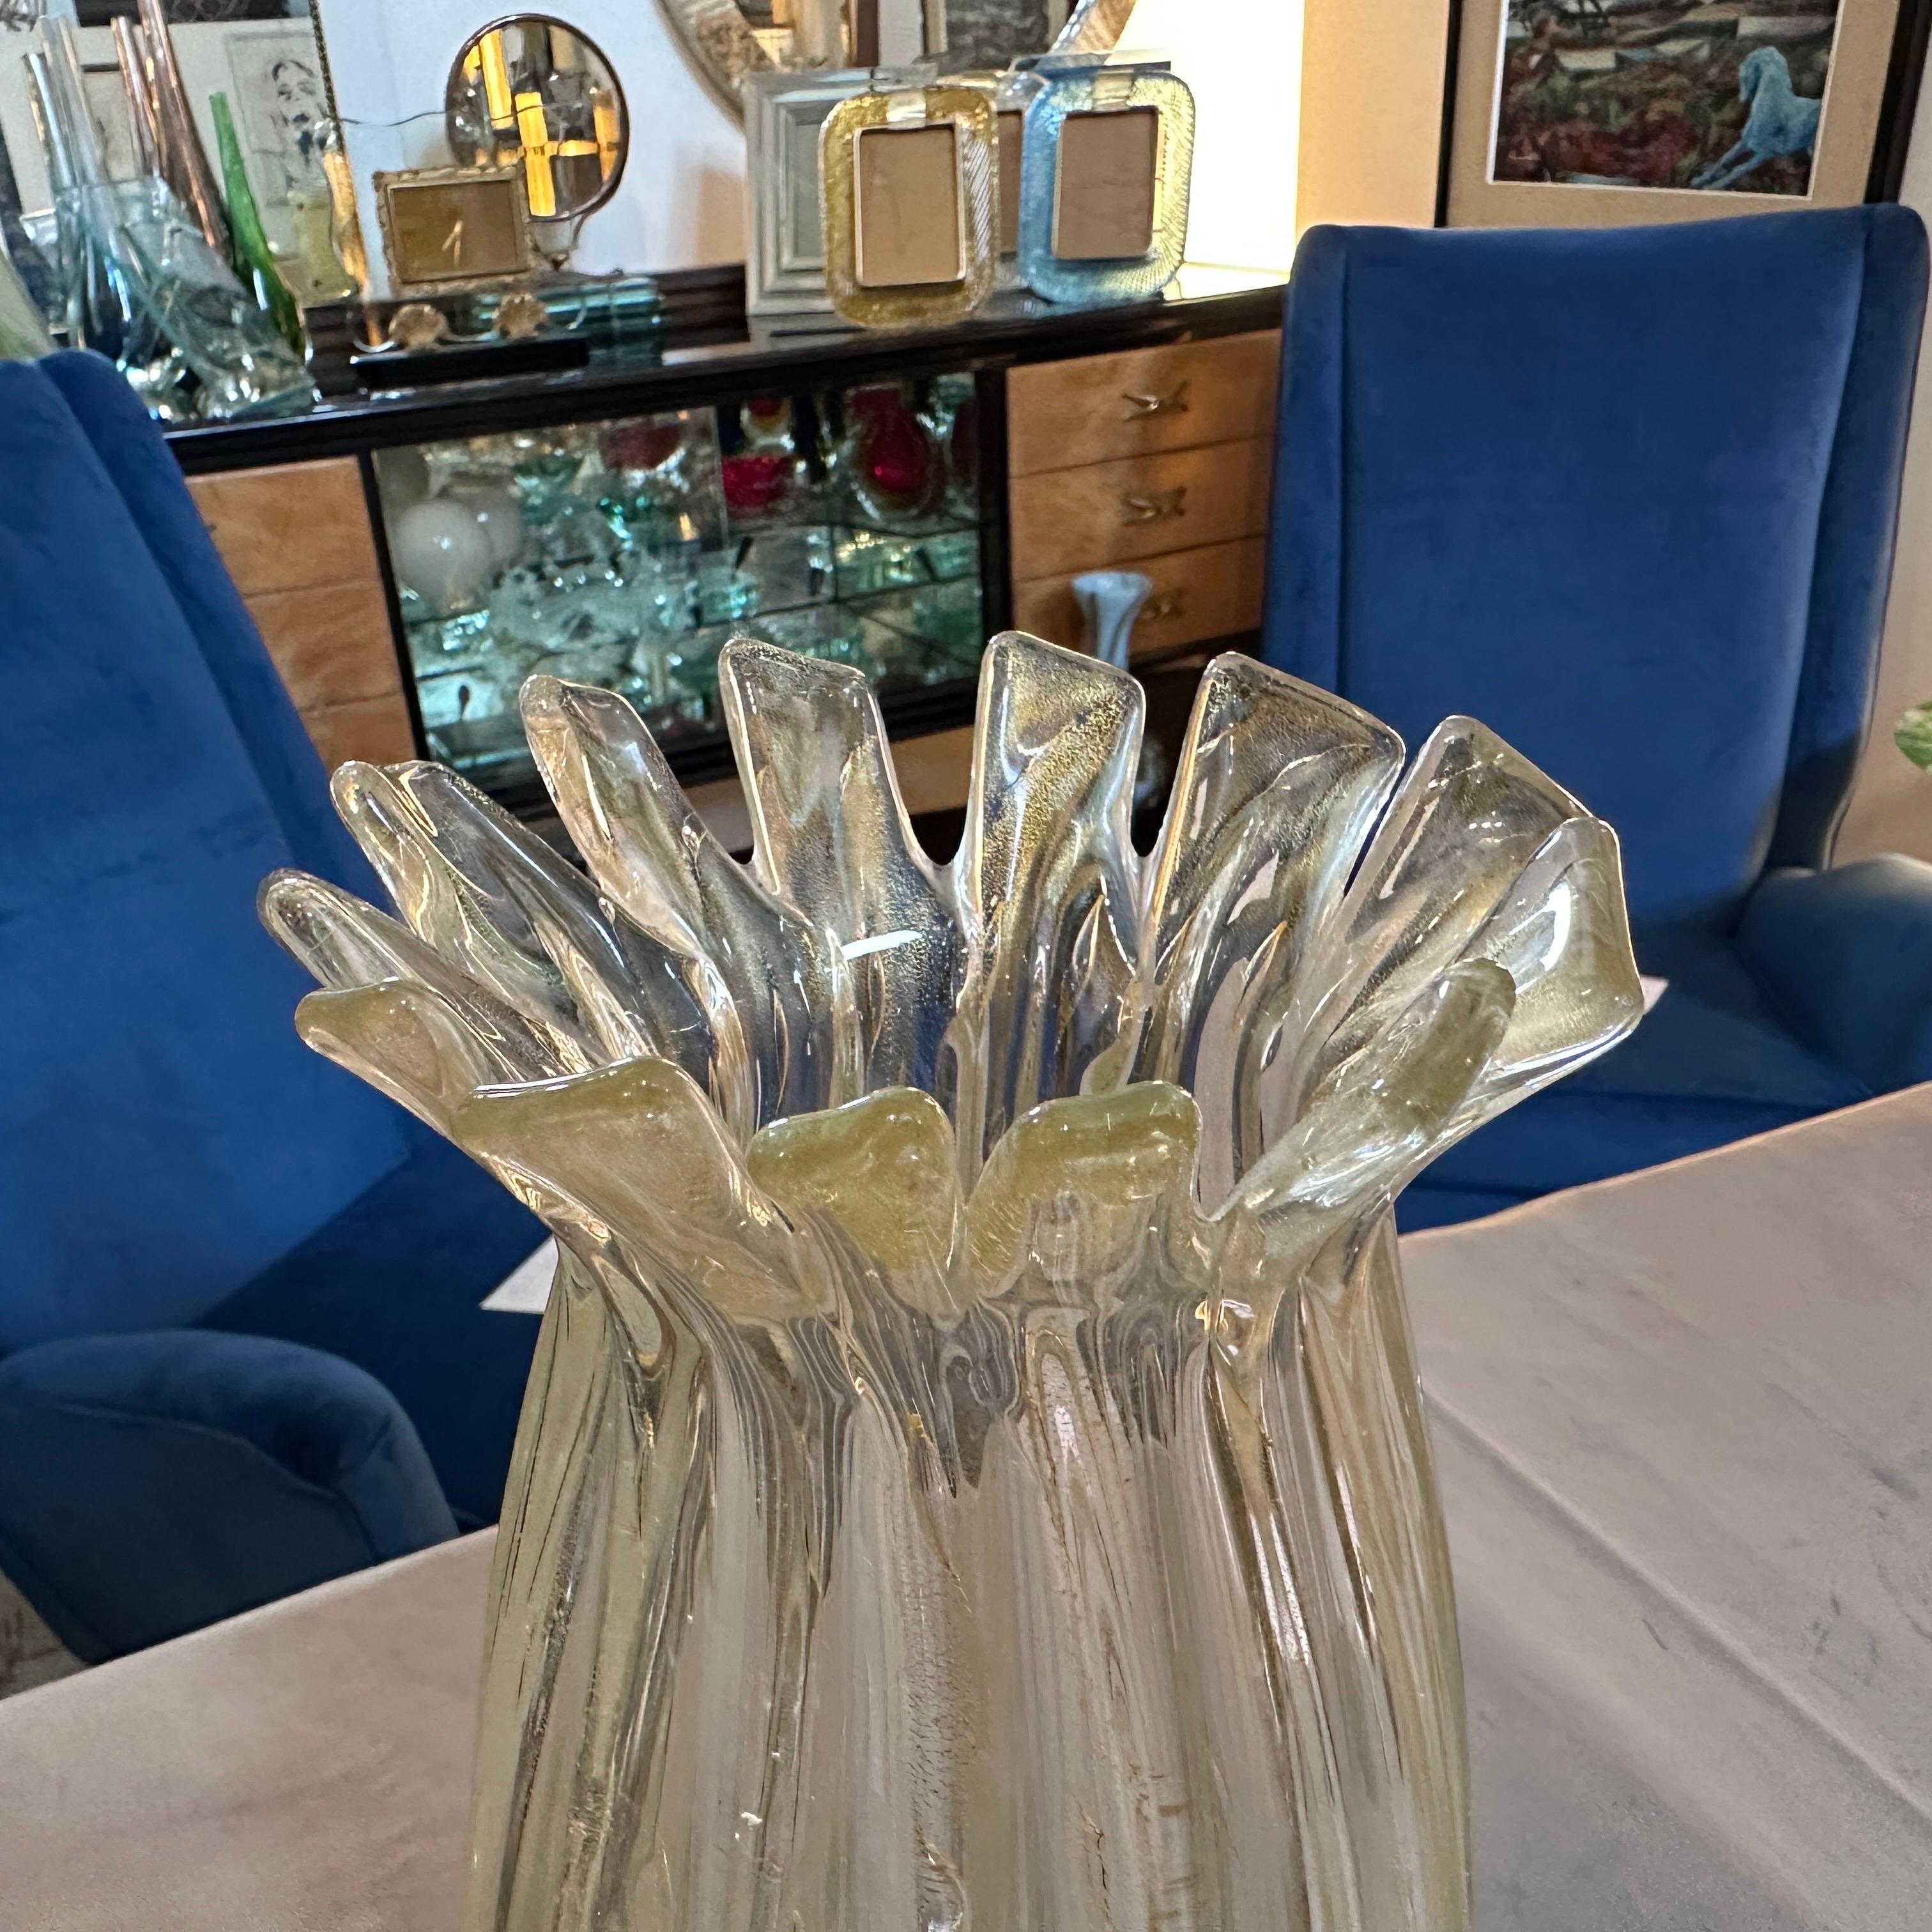 An high quality tall vase manufactured in Venice in the Seventies in the manner of Barovier, it's in lovely conditions. This Vase is a stunning piece of artistry and design that captures the essence of the era. It embodies the unique characteristics